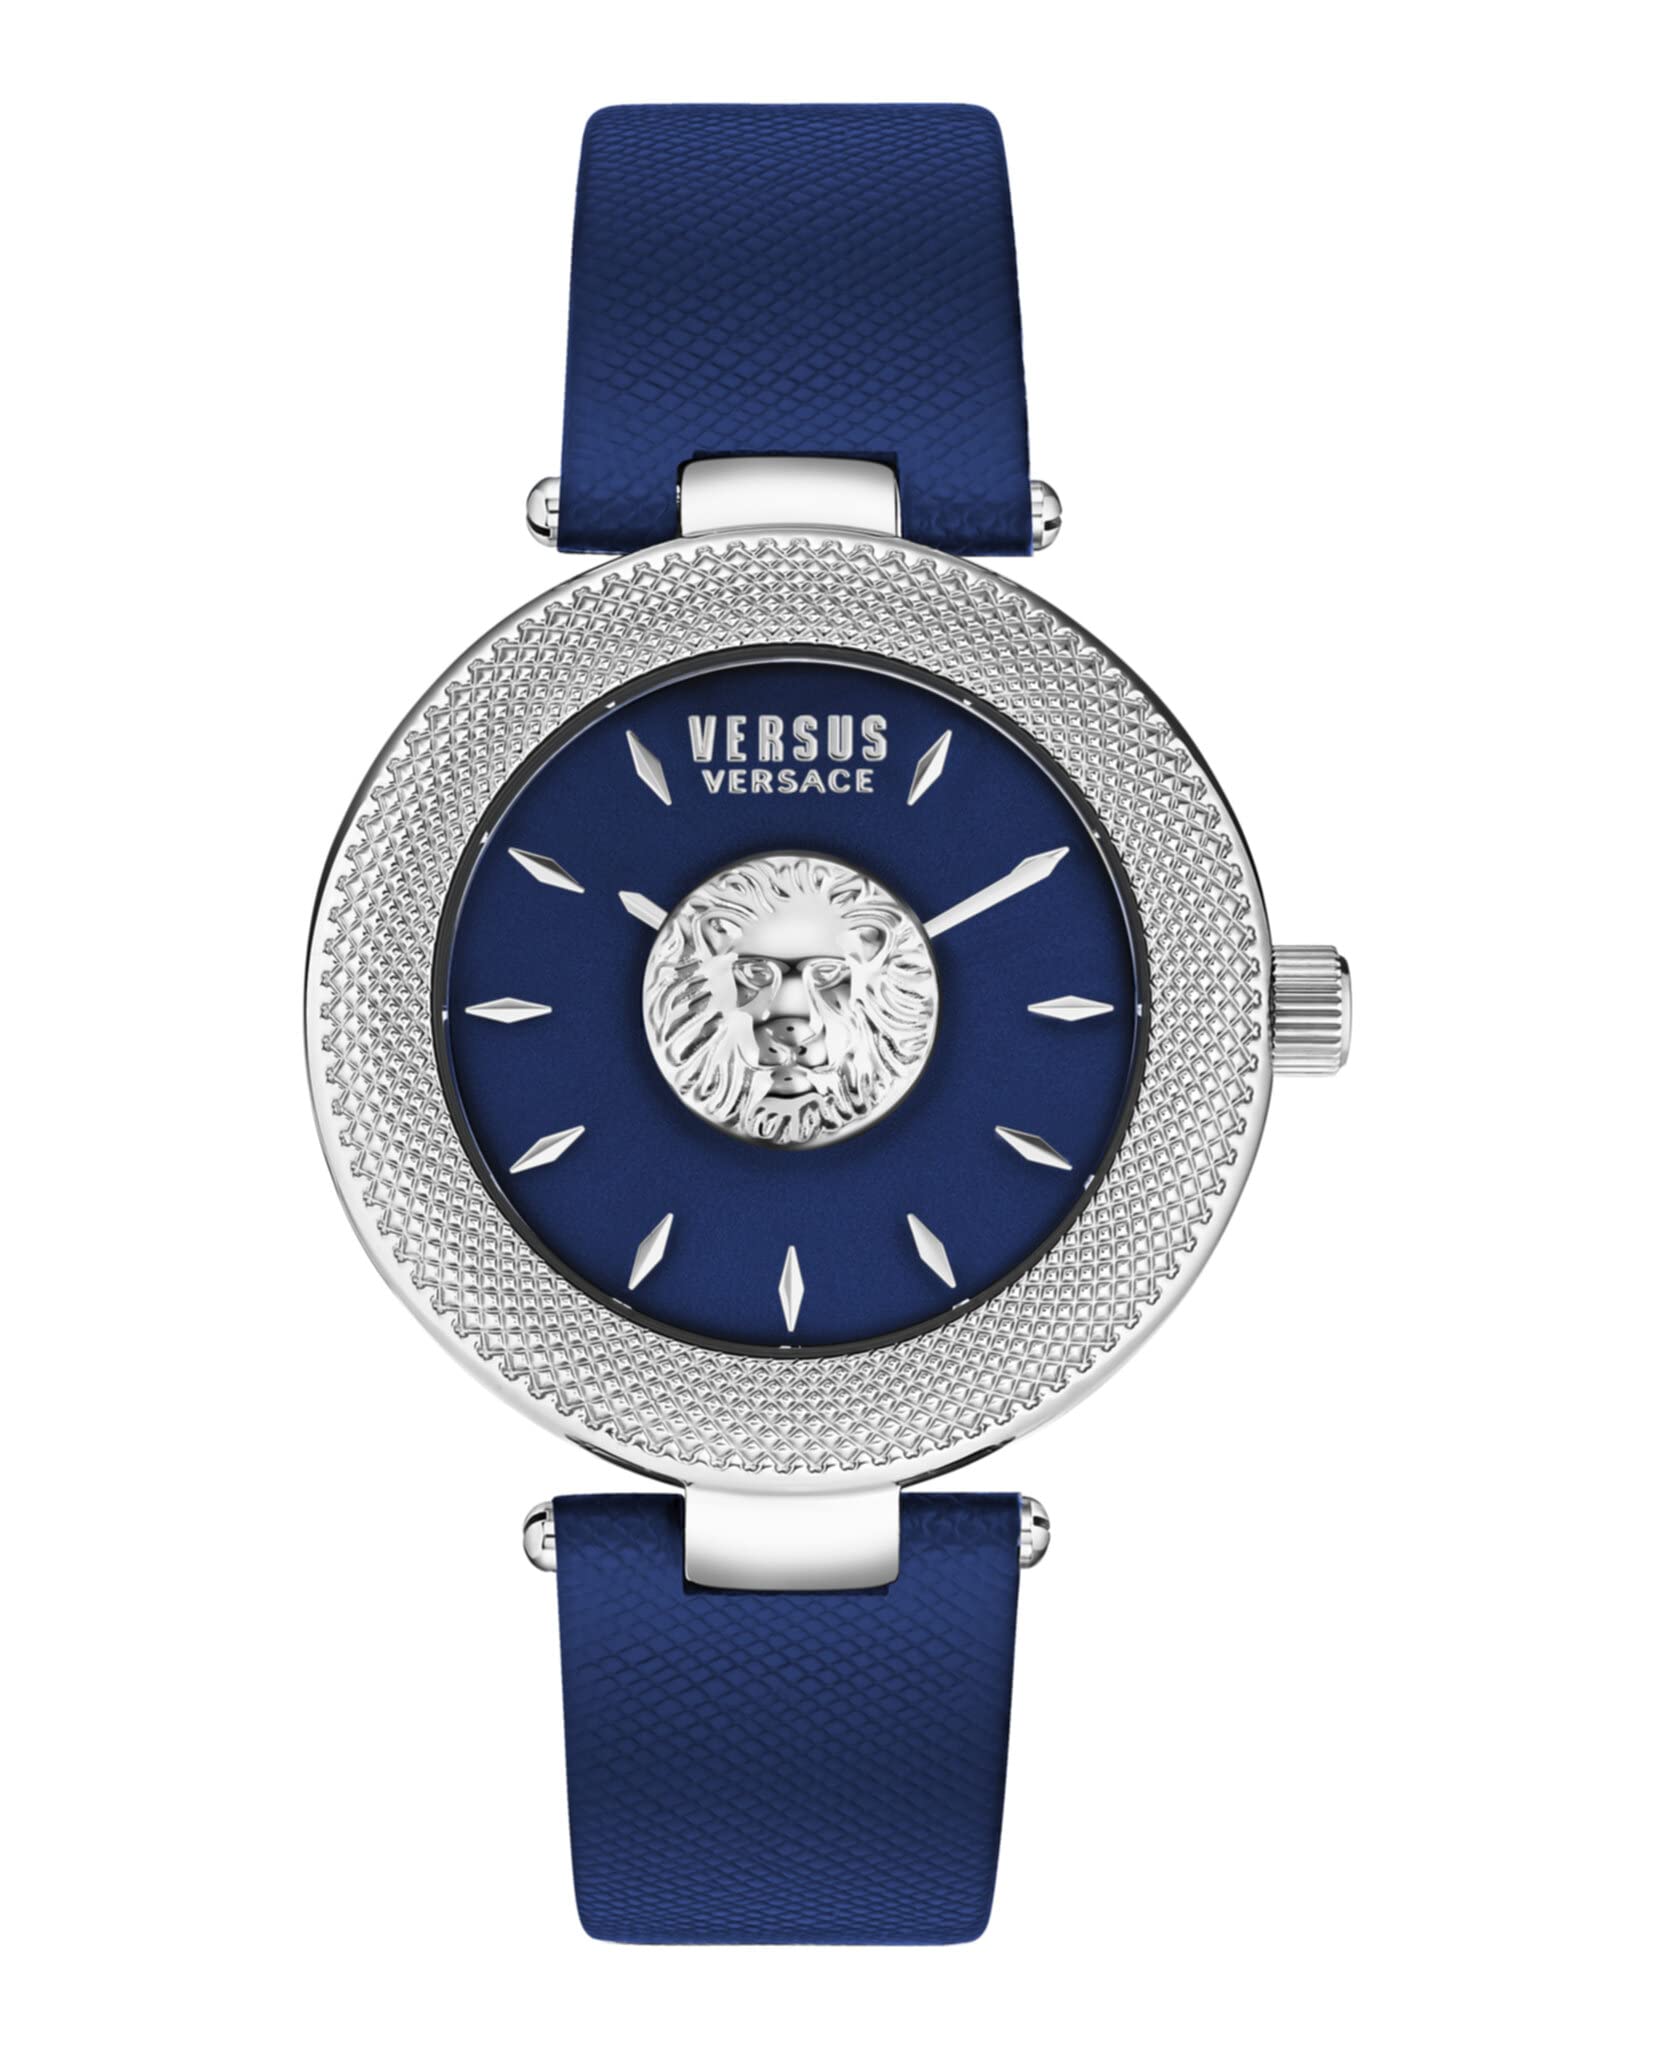 Versus Versace Gold Tone Womens Fashion Watch. Brick Lane Lion Genuine Black Leather Adjustable Strap Watch with Black Sunray Dial.